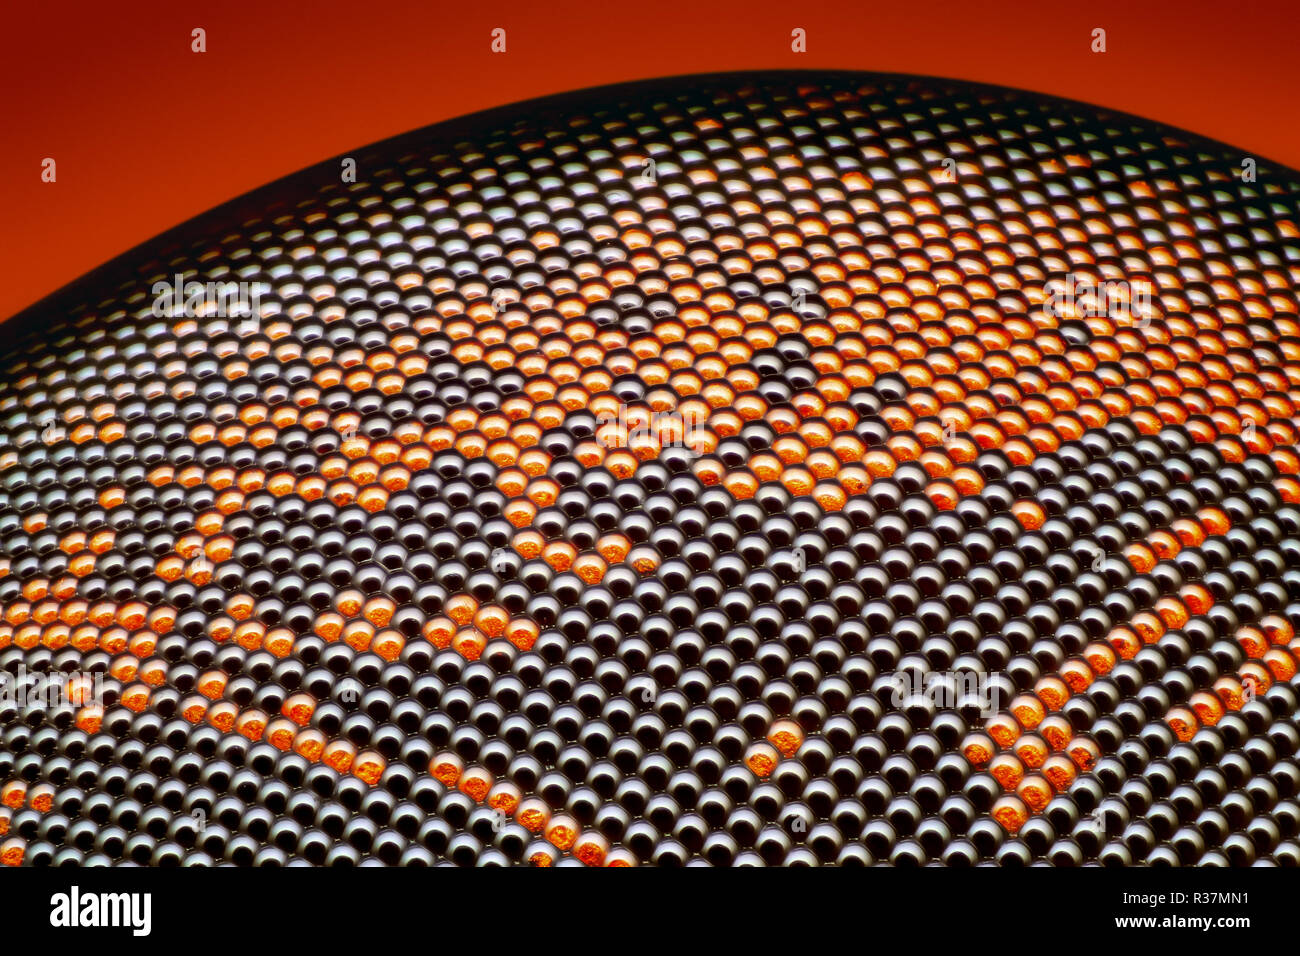 Extremely sharp and detailed fly compound eye surface at an extreme magnification Stock Photo